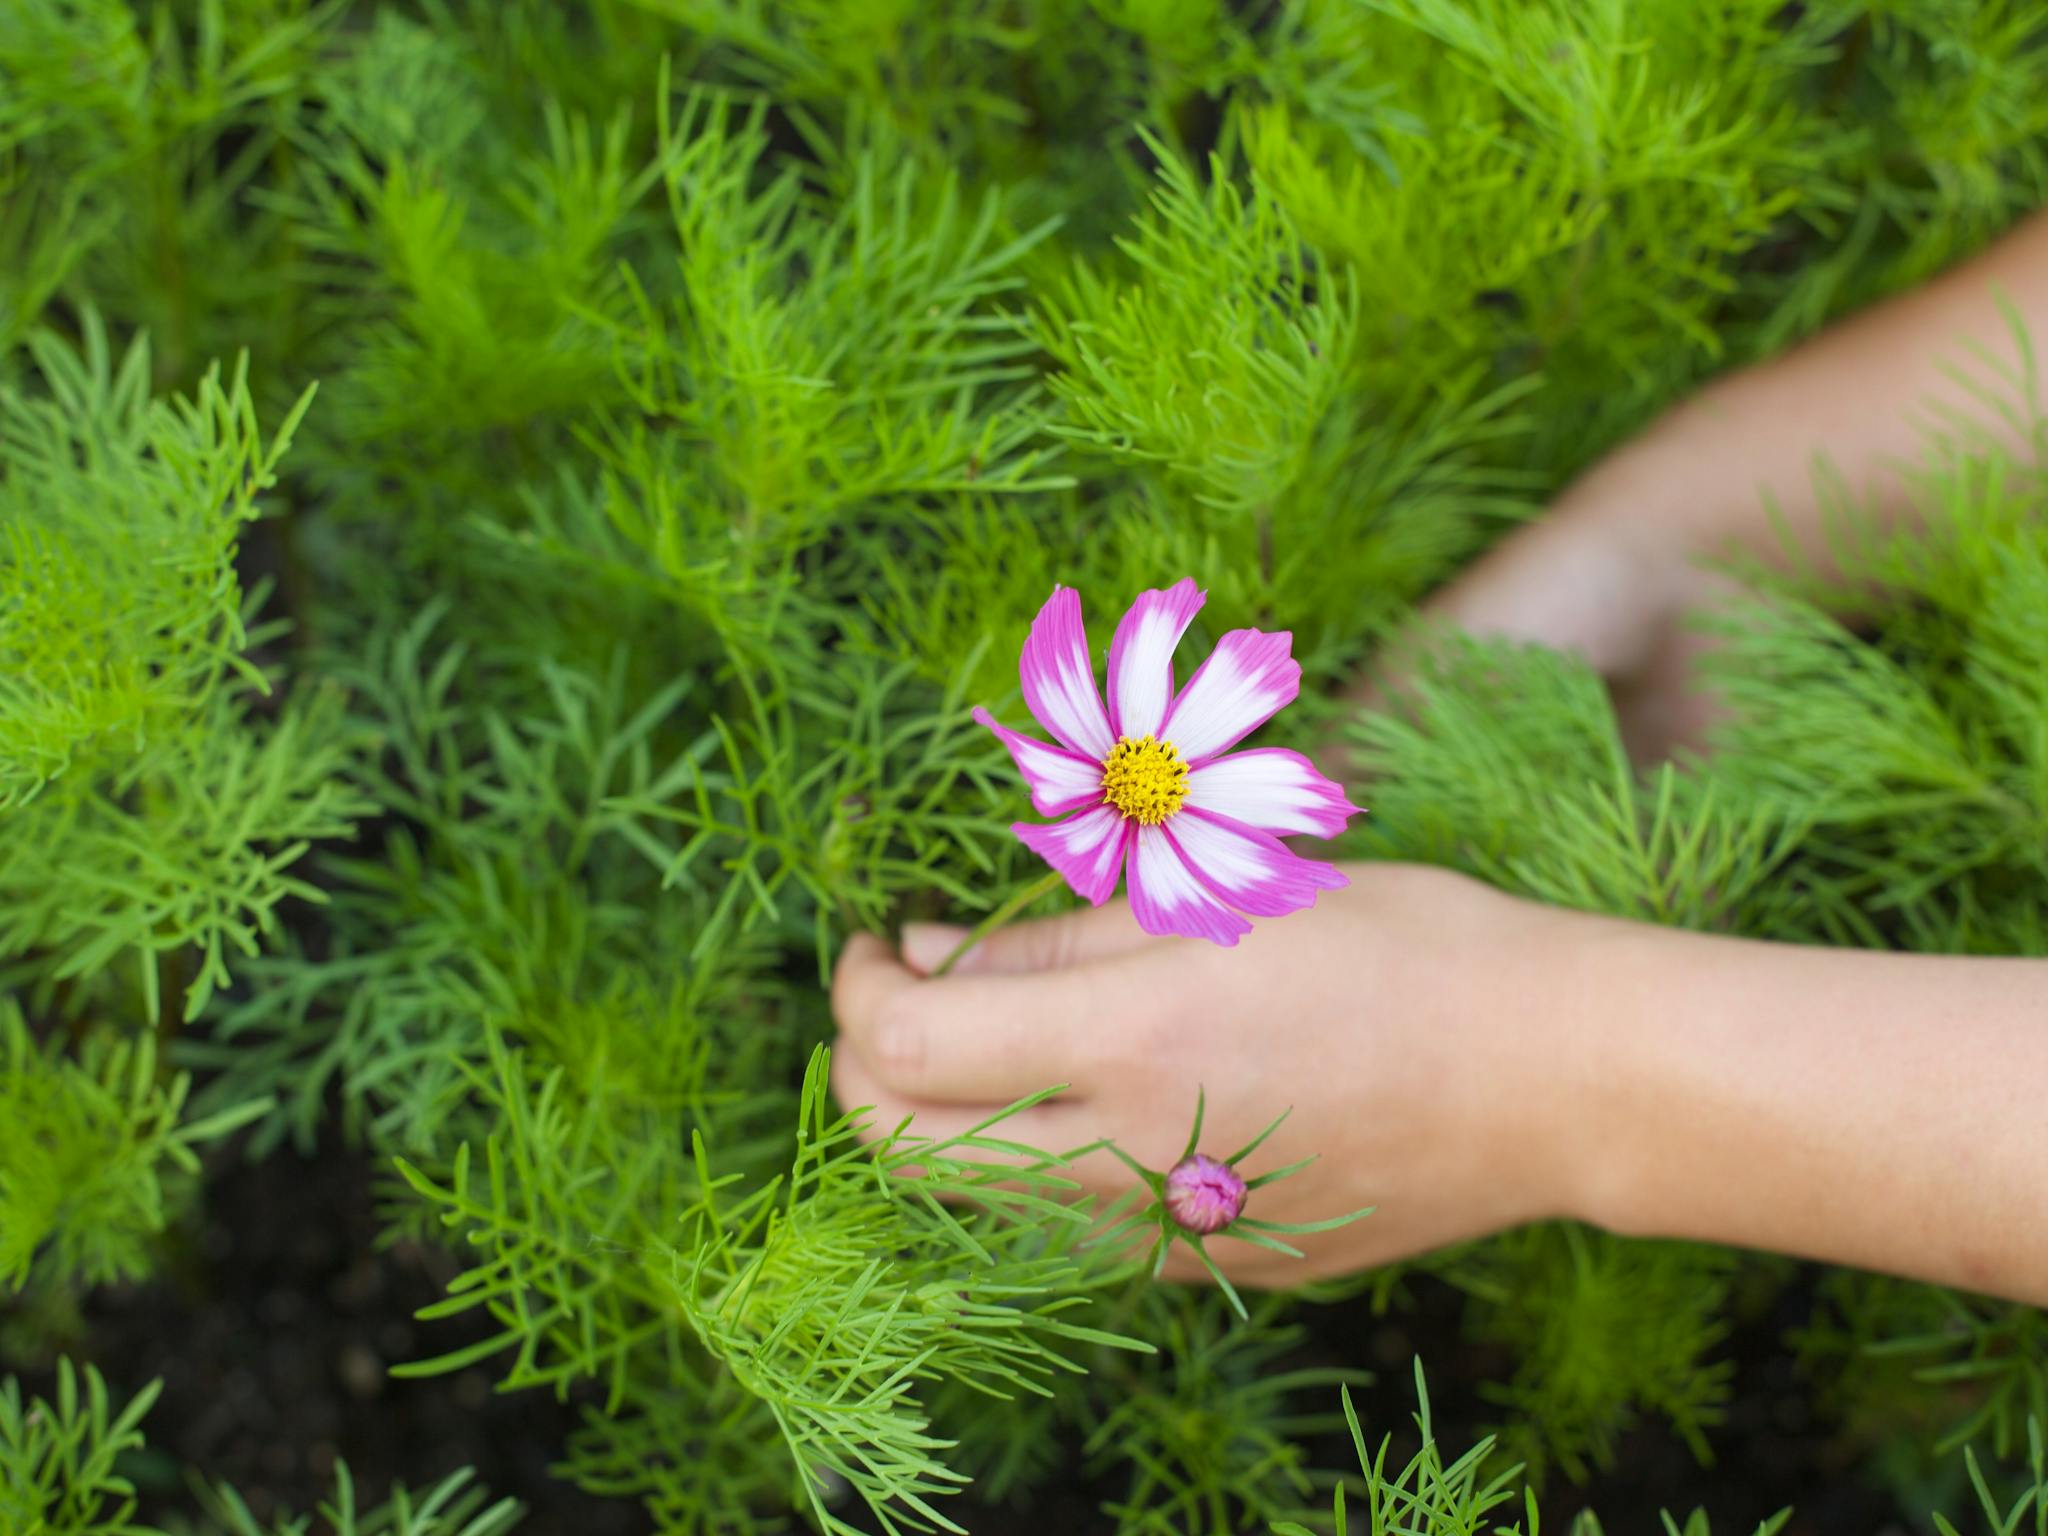 Close up shows a woman's hands preparing to snip a bicolour Cosmos flower against lush green foliage